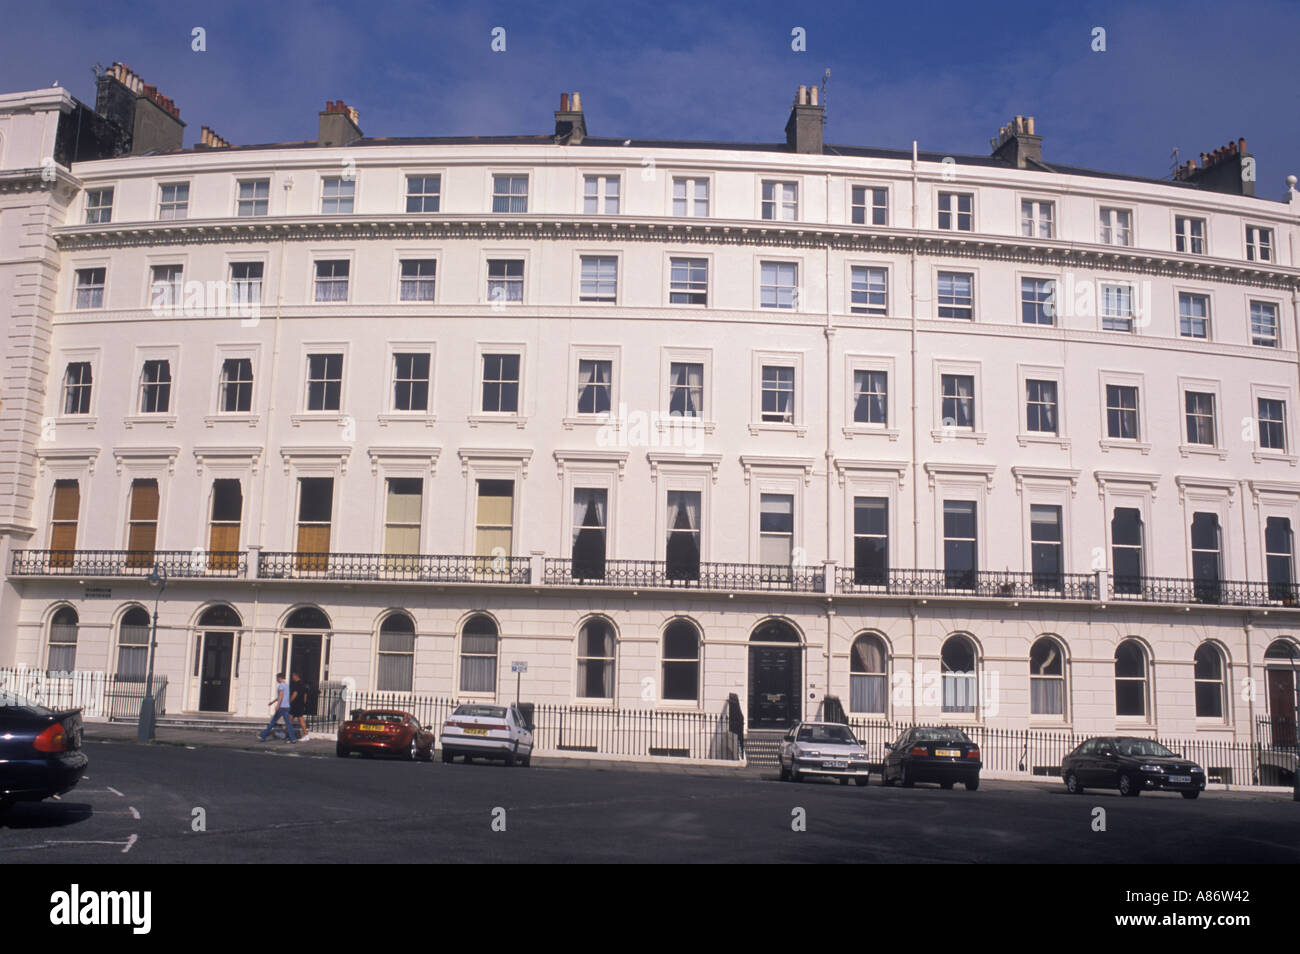 Hove near Brighton Seafront Palmeria Square  famous for its 19th century regency architecture  Sussex UK HOMER SYKES Stock Photo